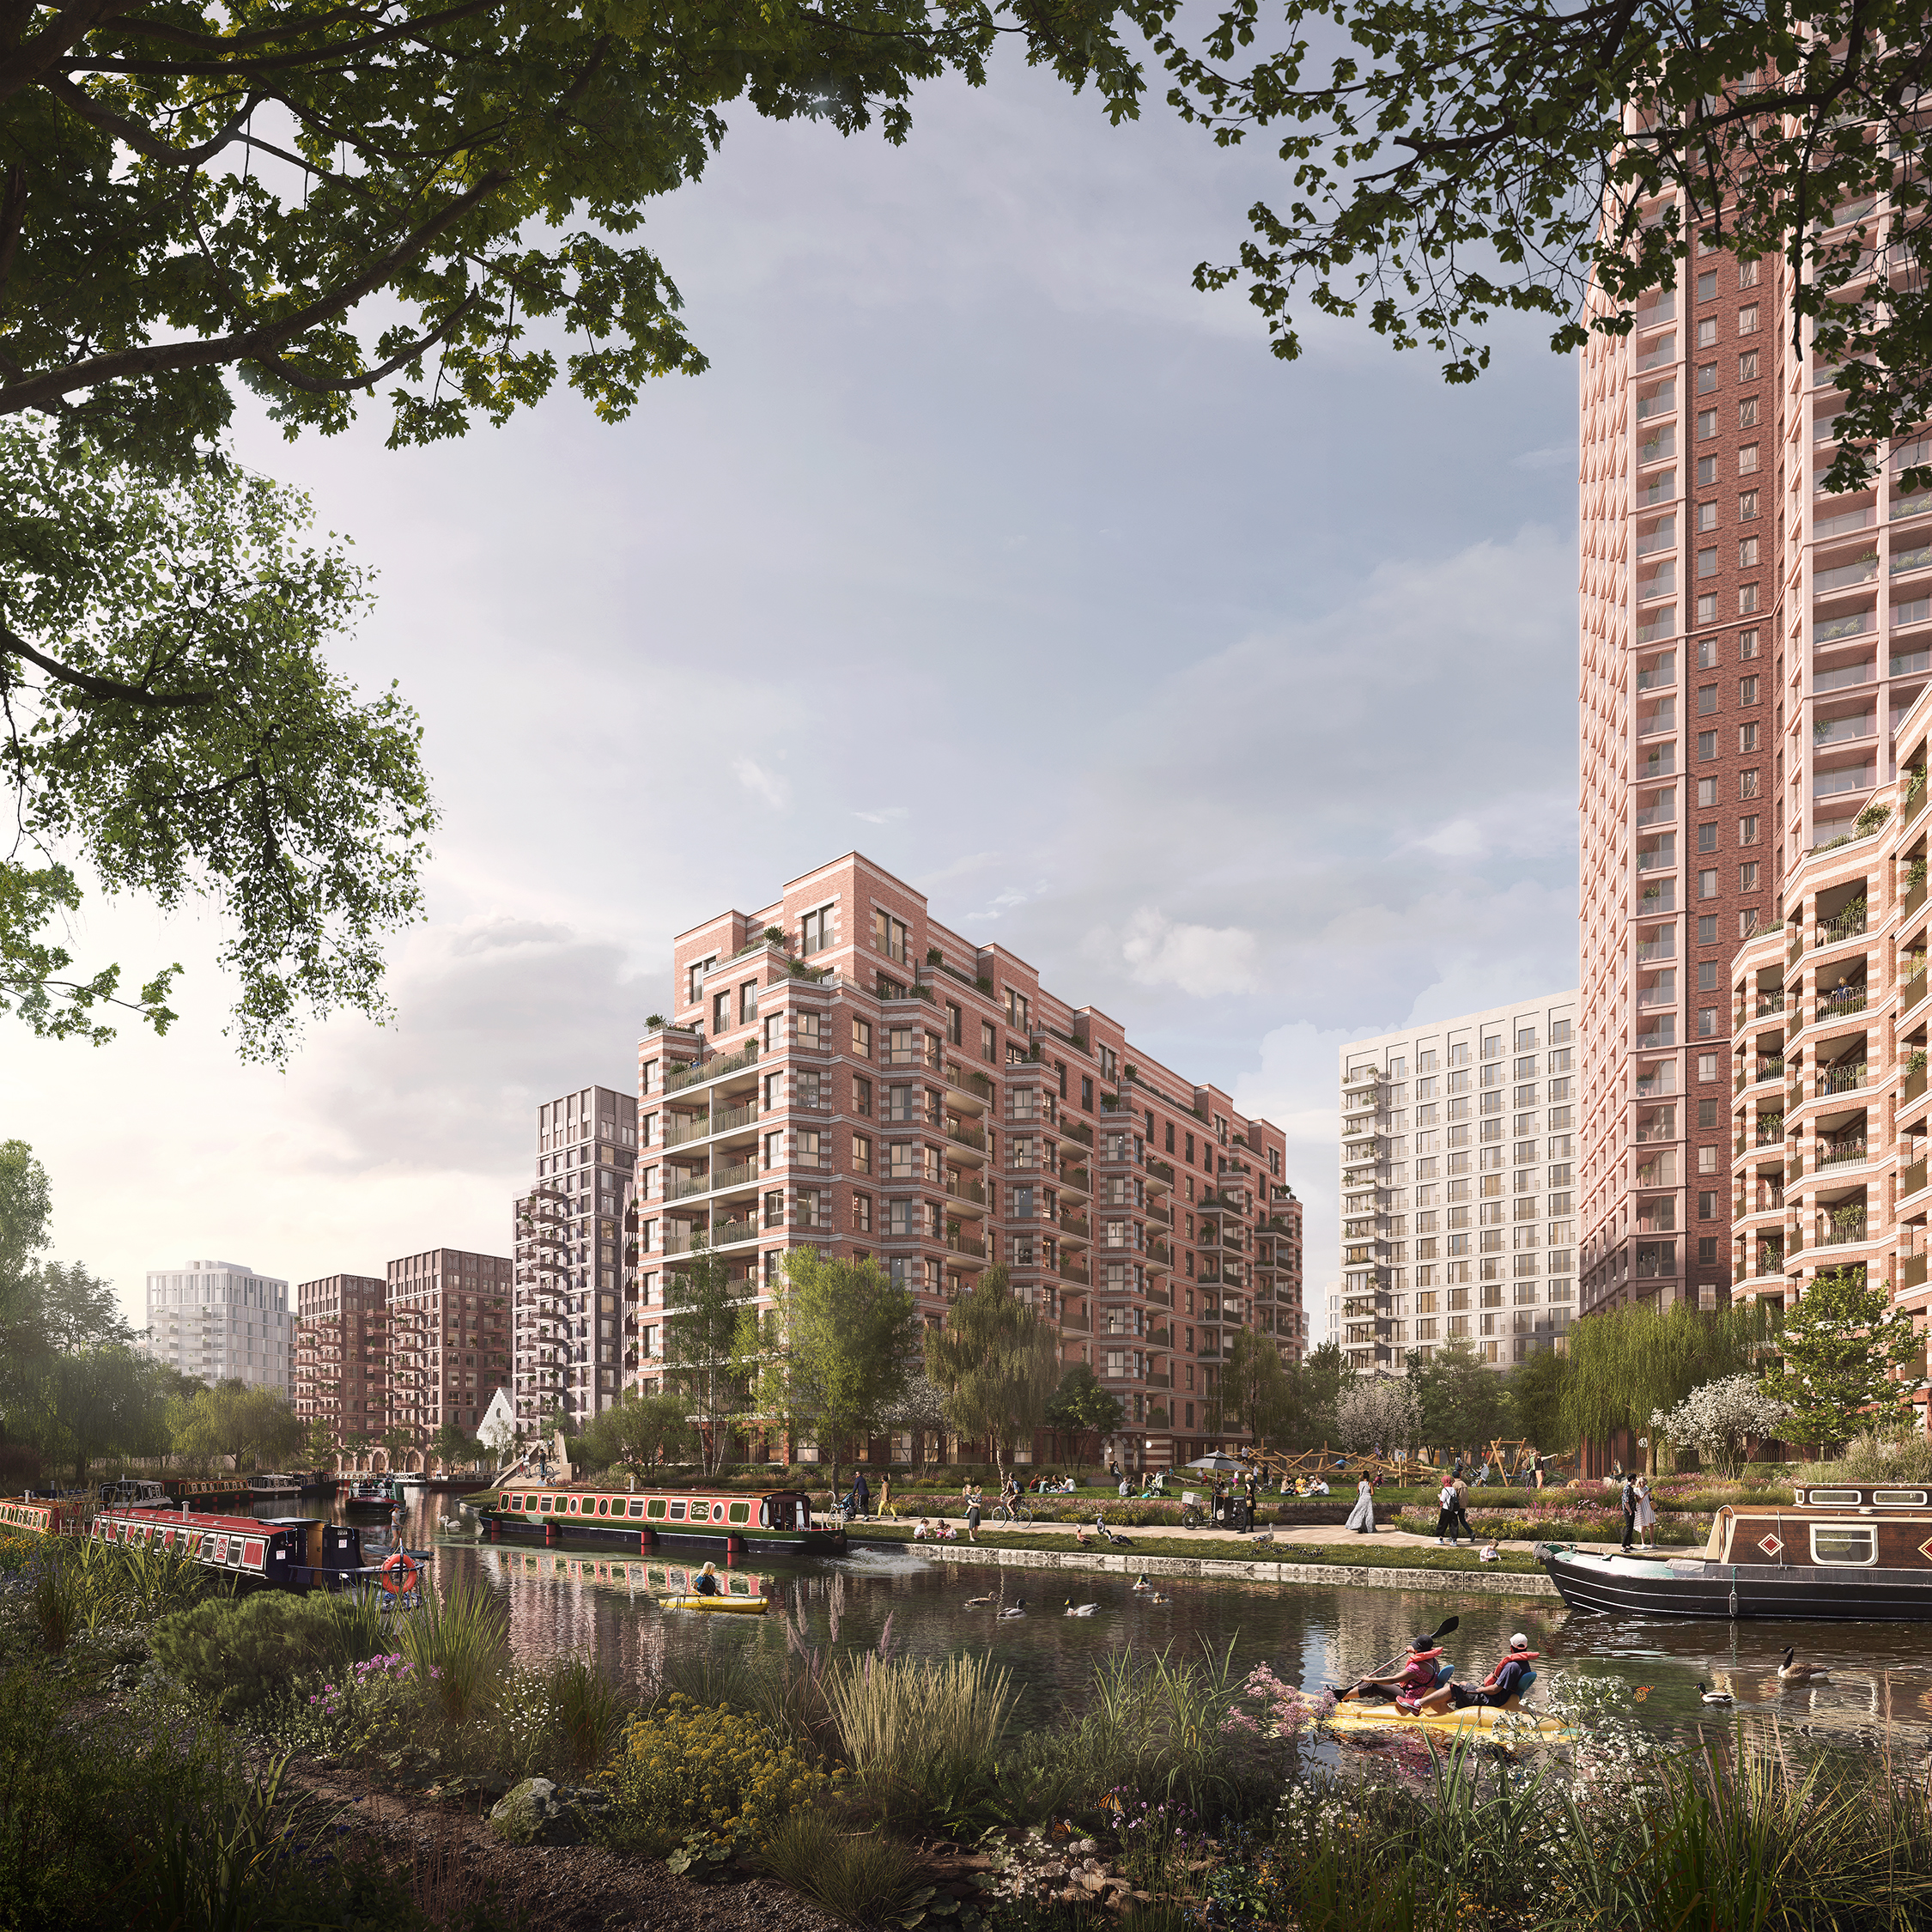 Ballymore and Sainsbury's submit plans for the redevelopment of the canalside brownfield site in Ladbroke Grove.